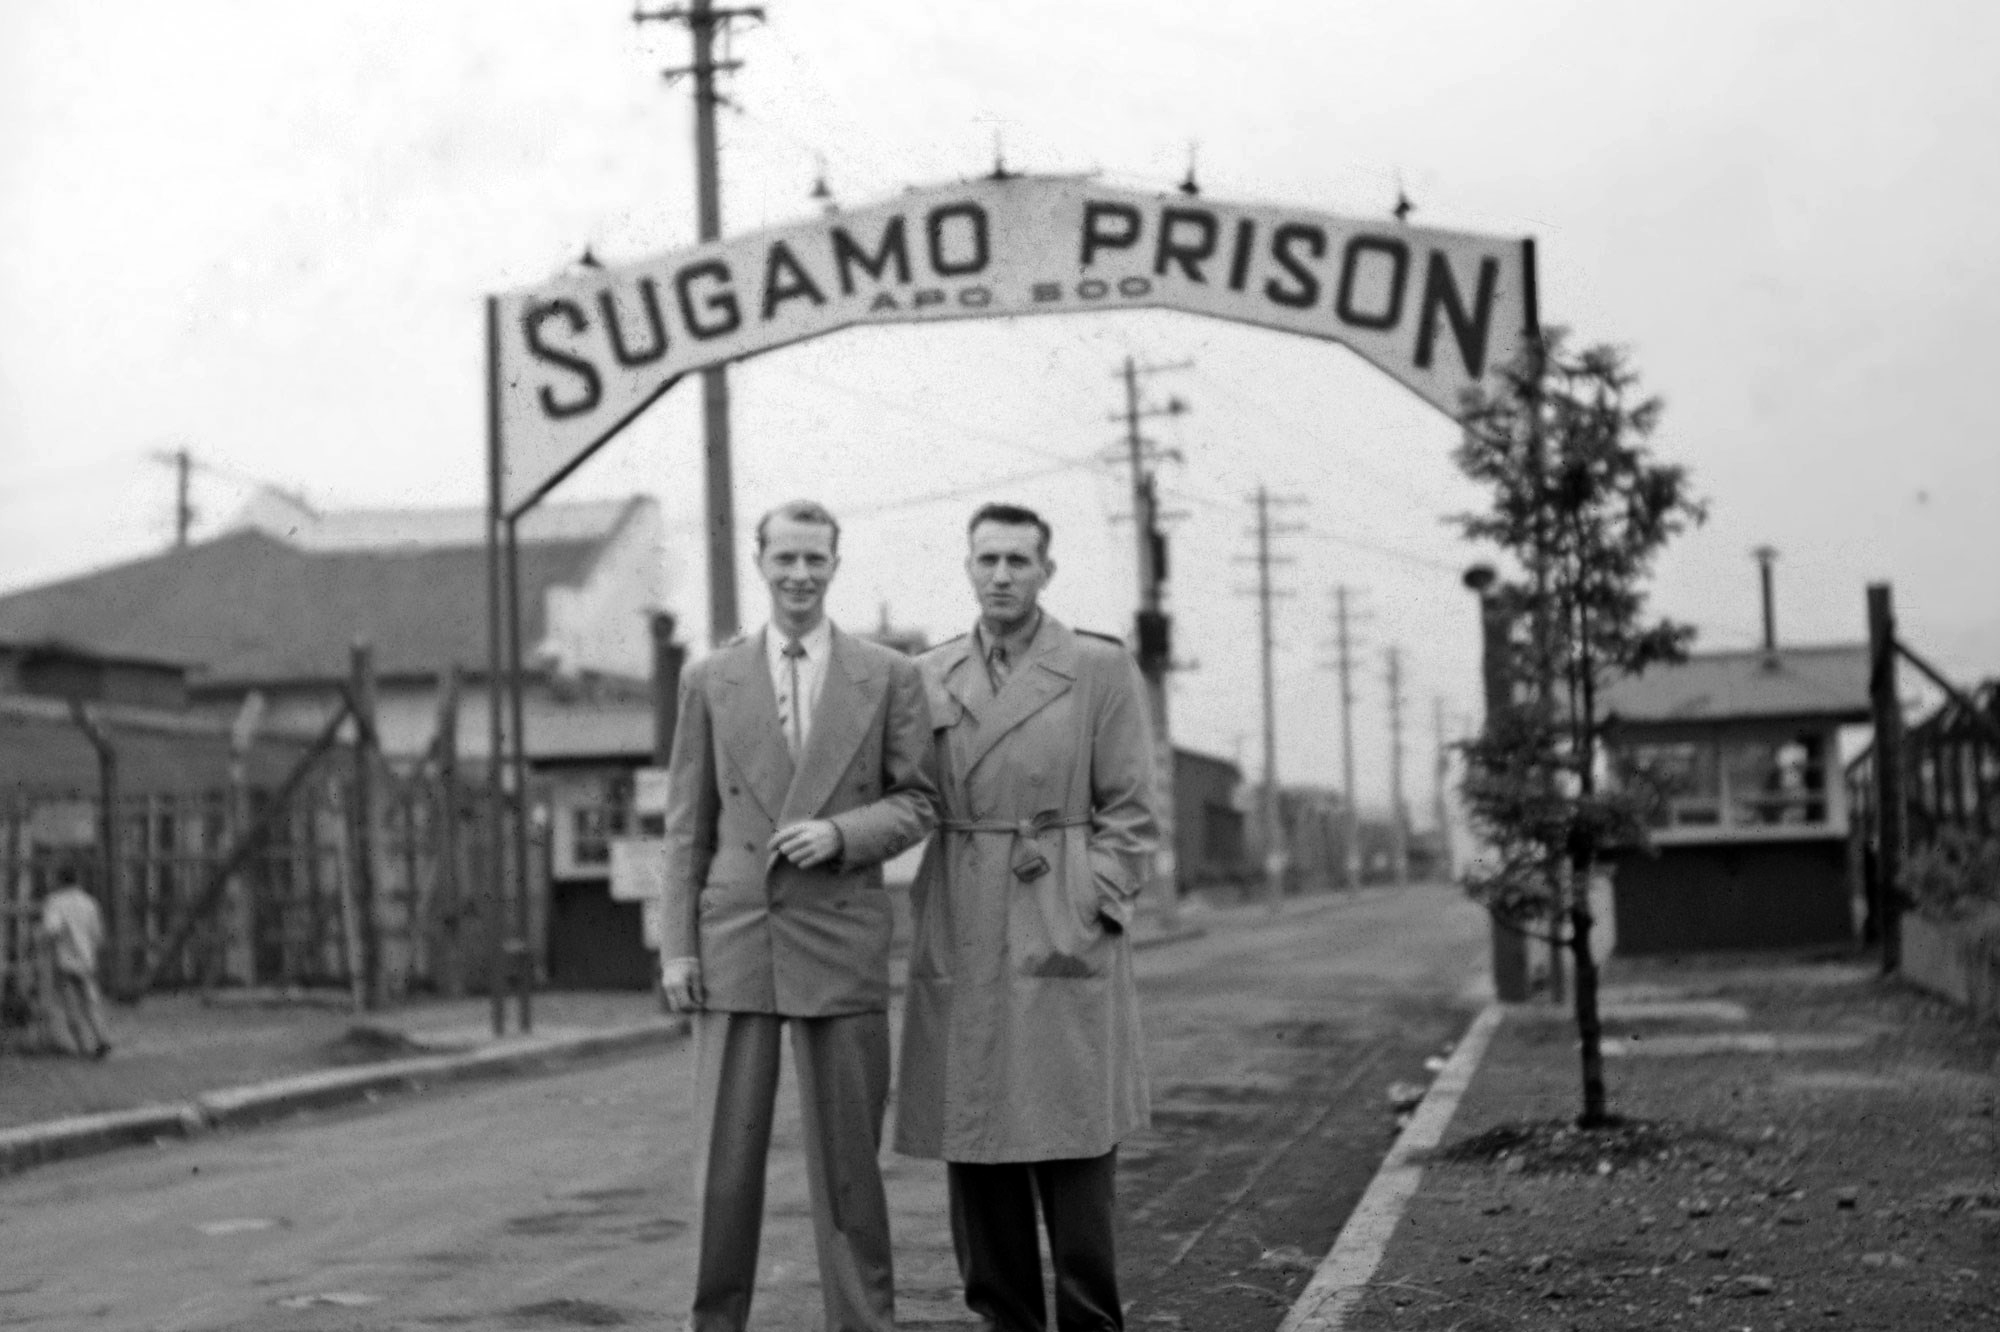 Initially refusing to ever set foot in Japan again, Louie Zamperini relented. Among other places, he visited men charged with war crimes who were being held at Sugamo Prison. He forgave all the men who had harmed him while Zamp was a POW. Image online, courtesy Louis Zamperini.